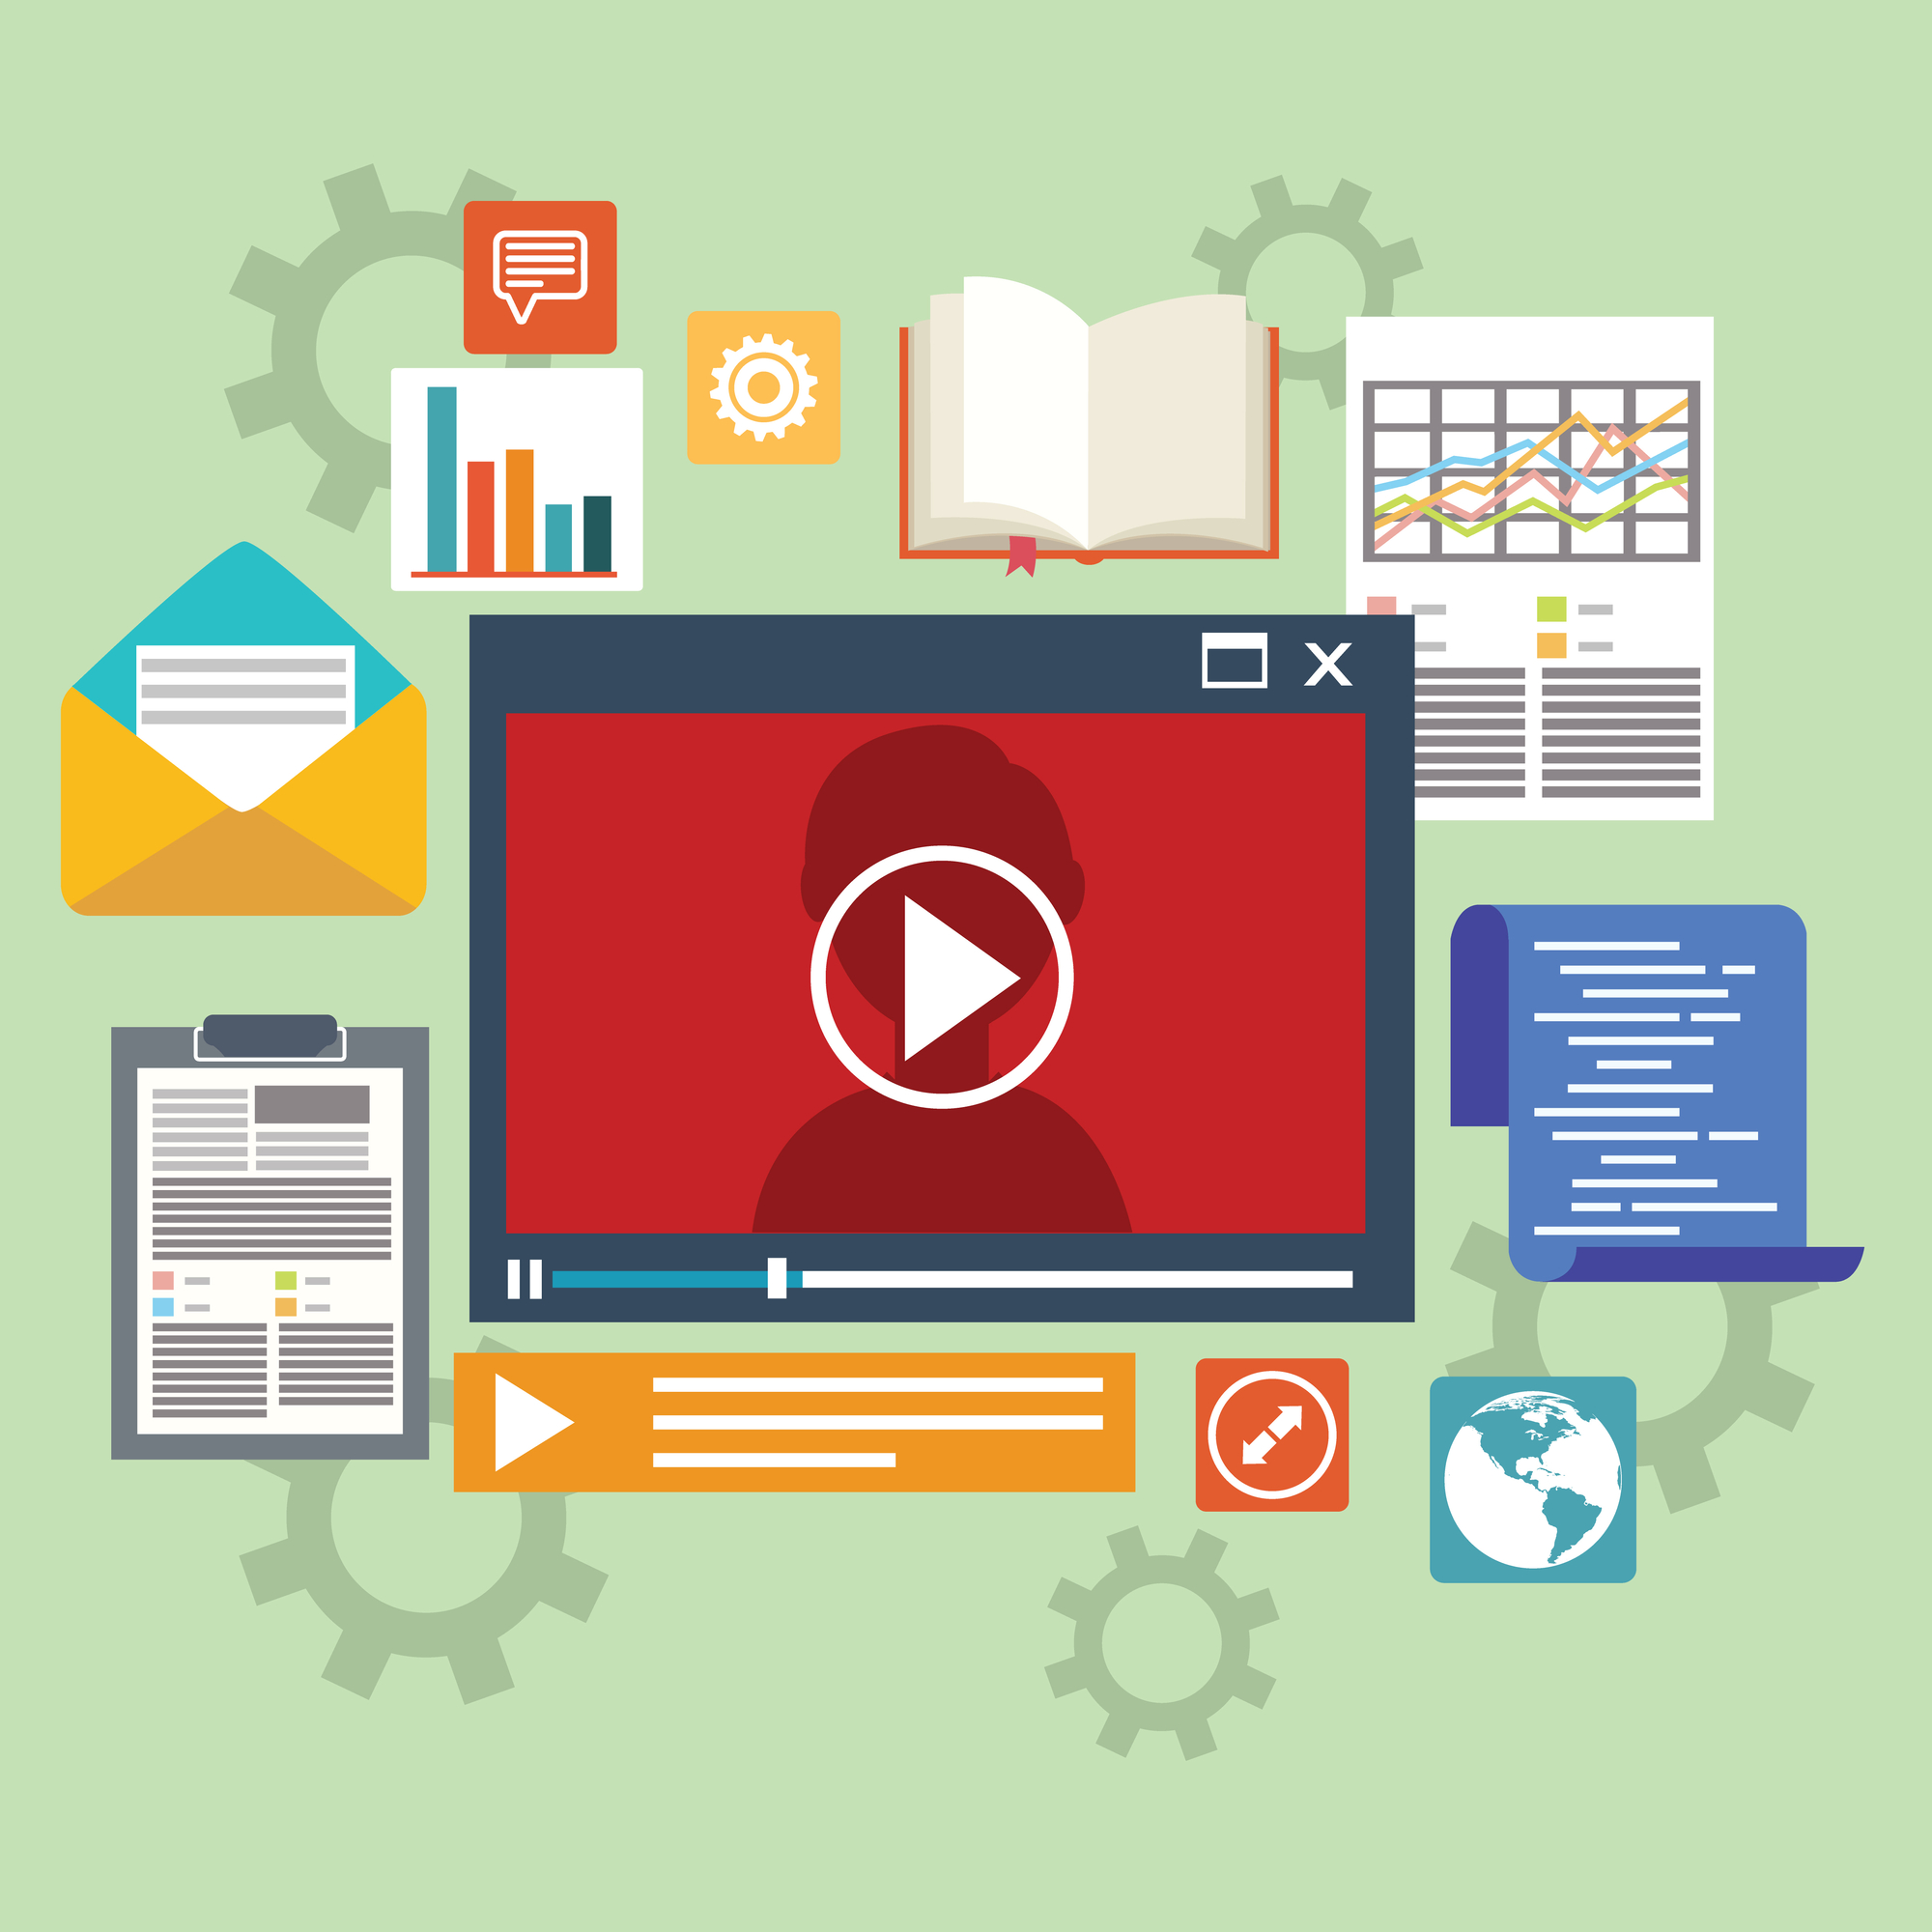 E-learning concept in flat style - digital content and online webinar icons